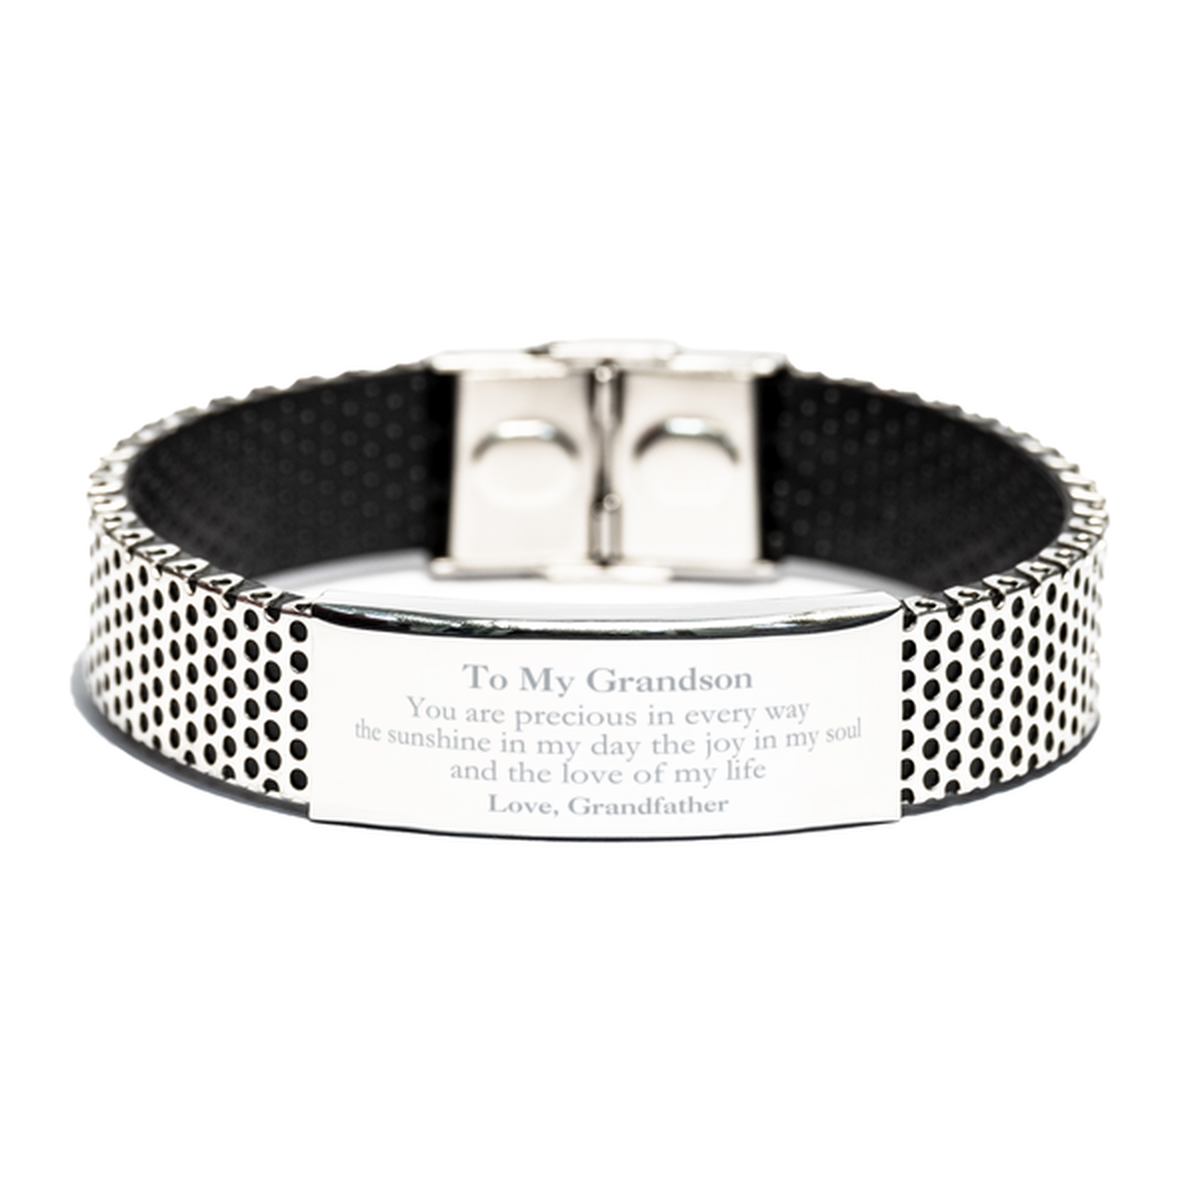 Graduation Gifts for Grandson Stainless Steel Bracelet Present from Grandfather, Christmas Grandson Birthday Gifts Grandson You are precious in every way the sunshine in my day. Love, Grandfather